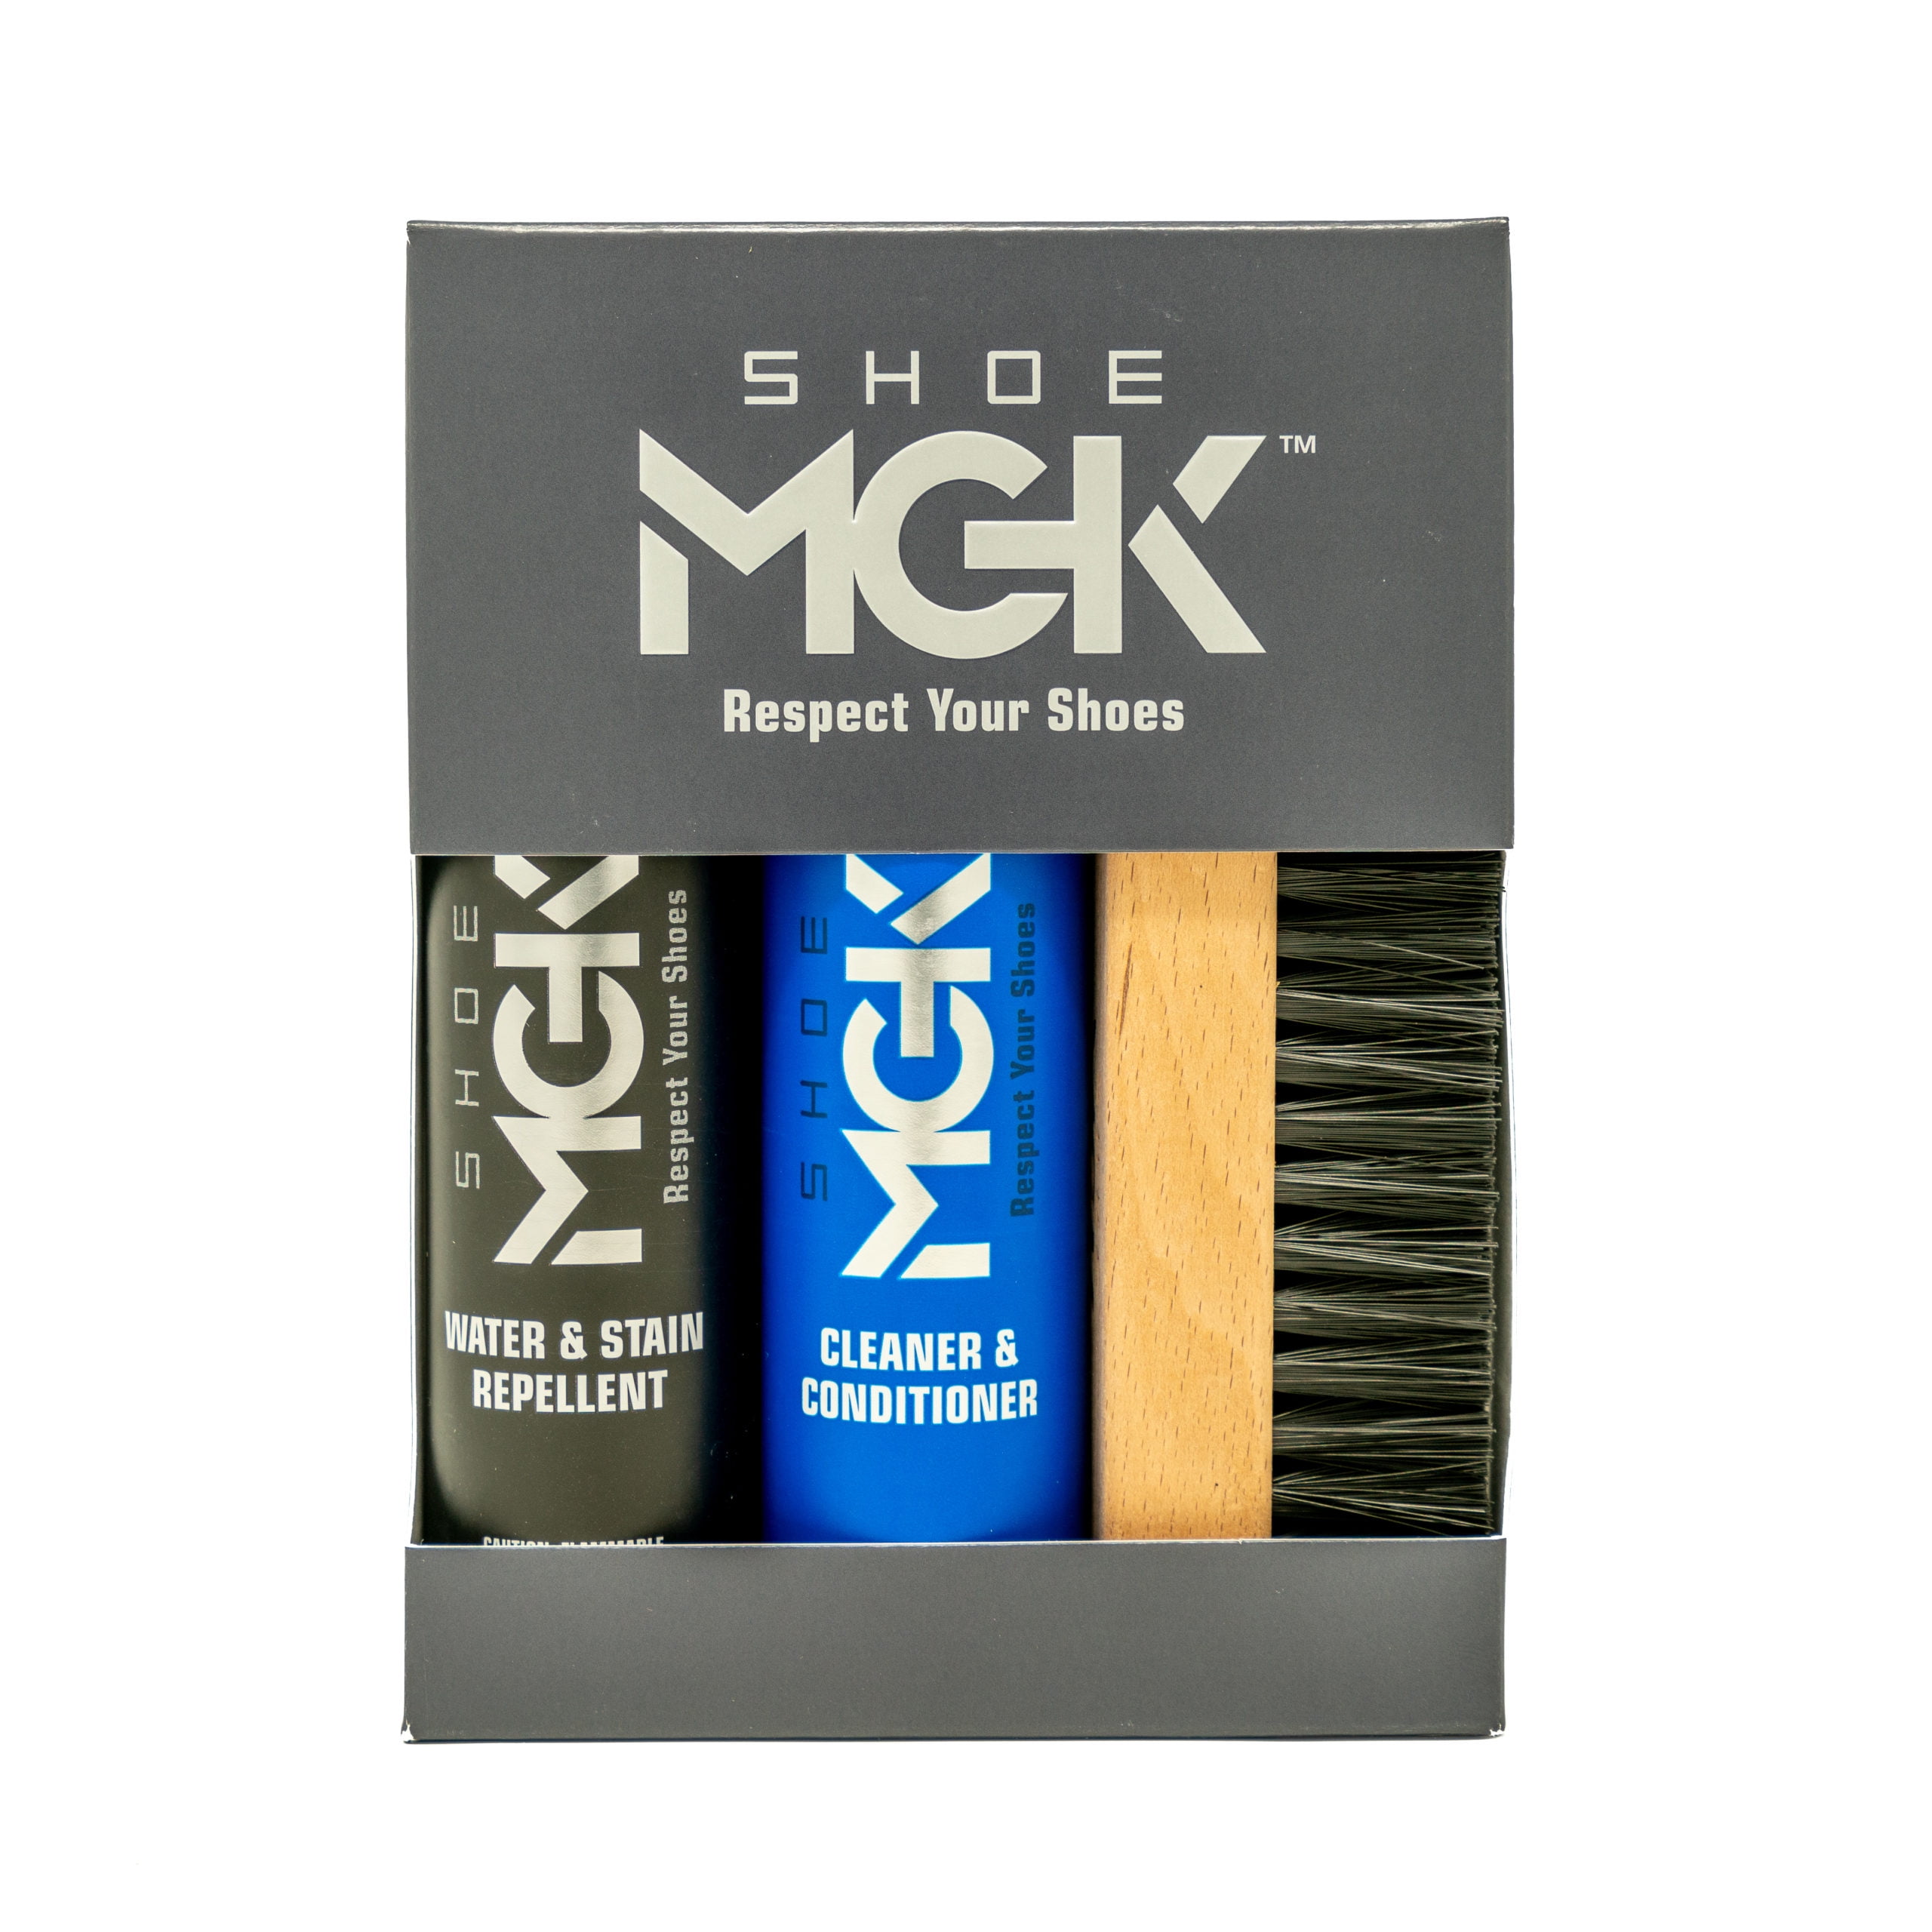 Shoe MGK Shoe Cleaner Kit - Water & Stain Repellent Plus Sneaker Cleaner Solution